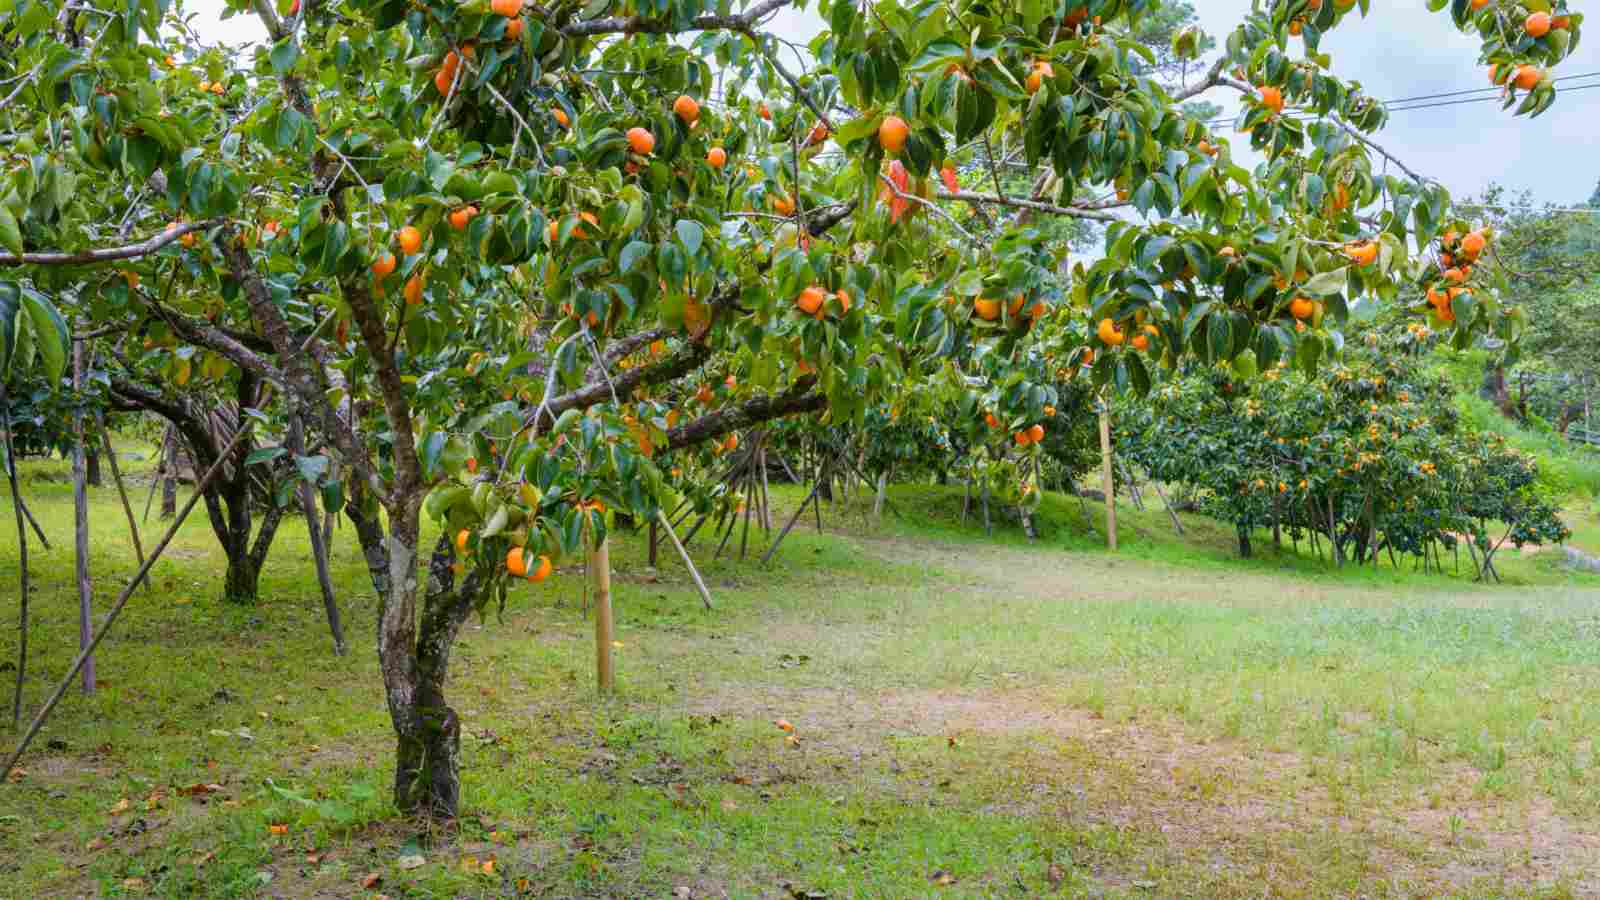 How to Trim Persimmon Trees